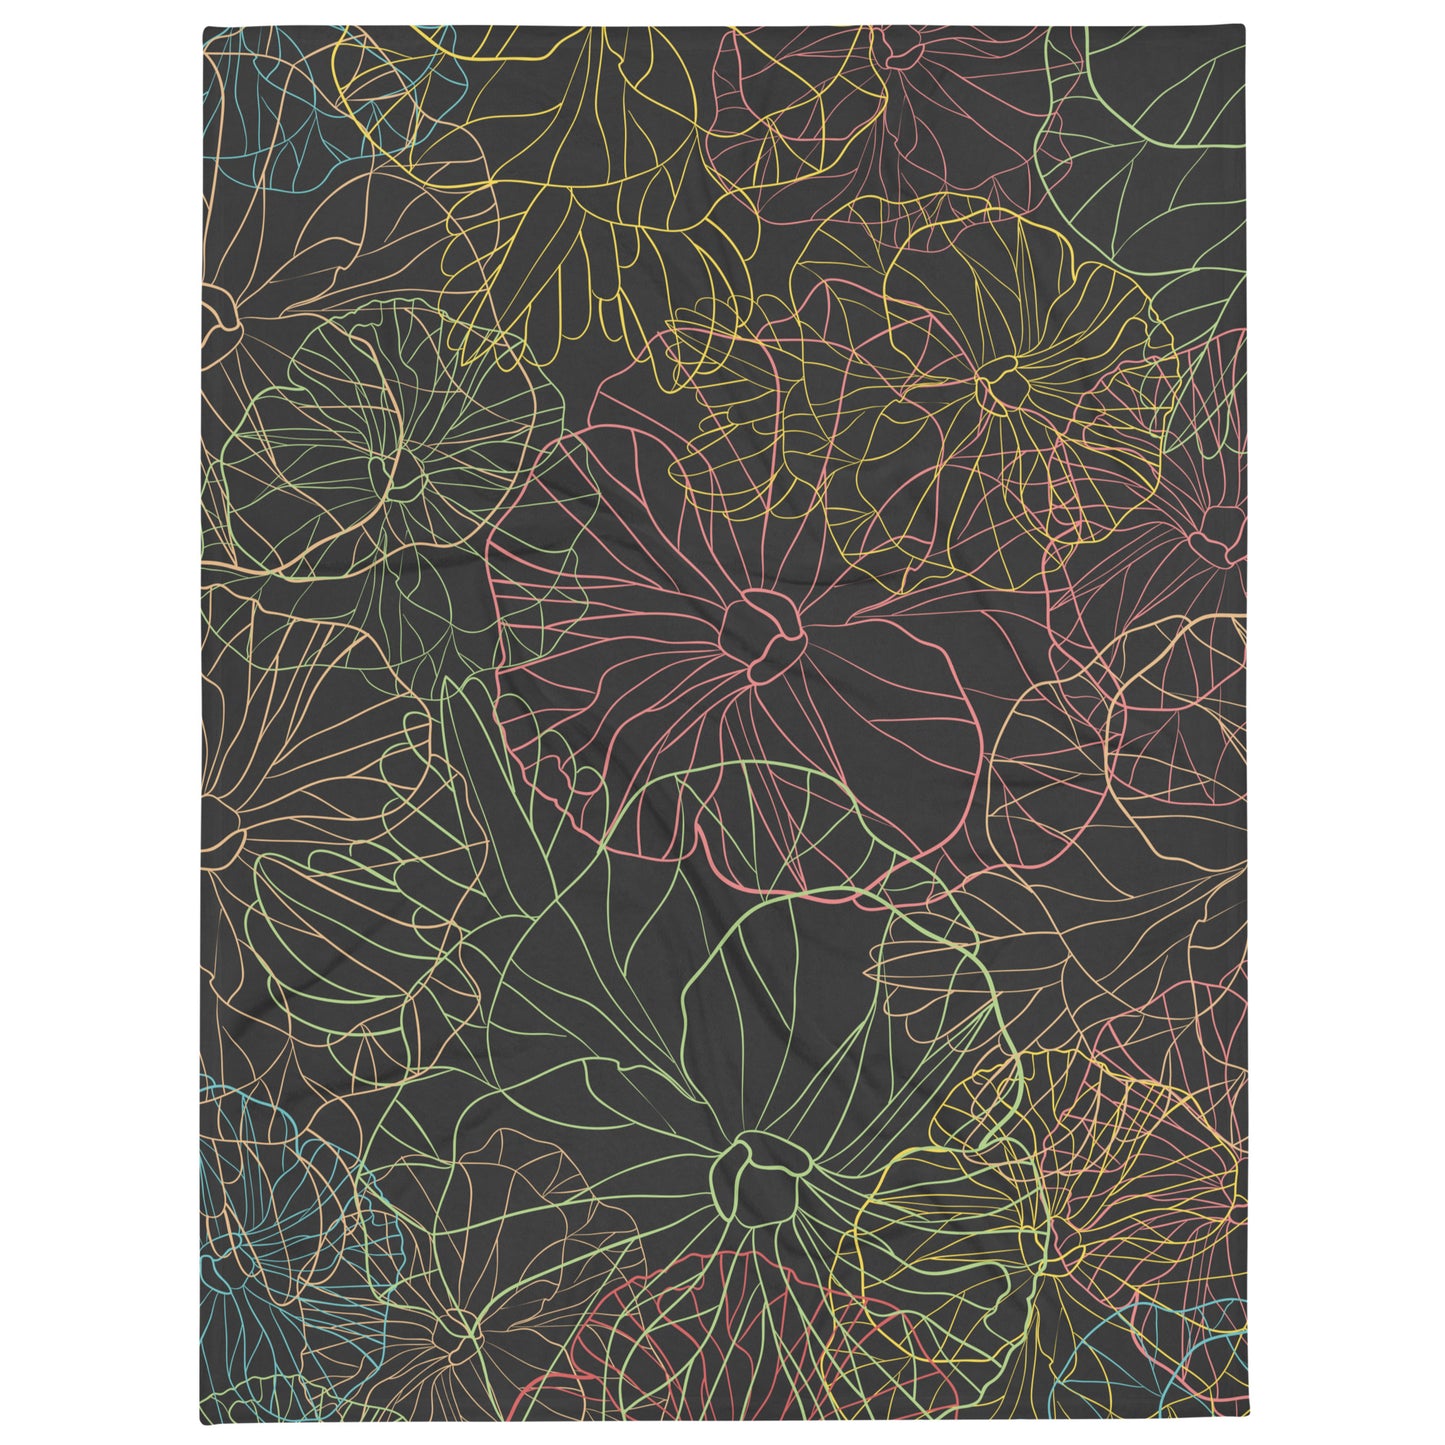 Neon Dark Floral - Sustainably Made Throw Blanket